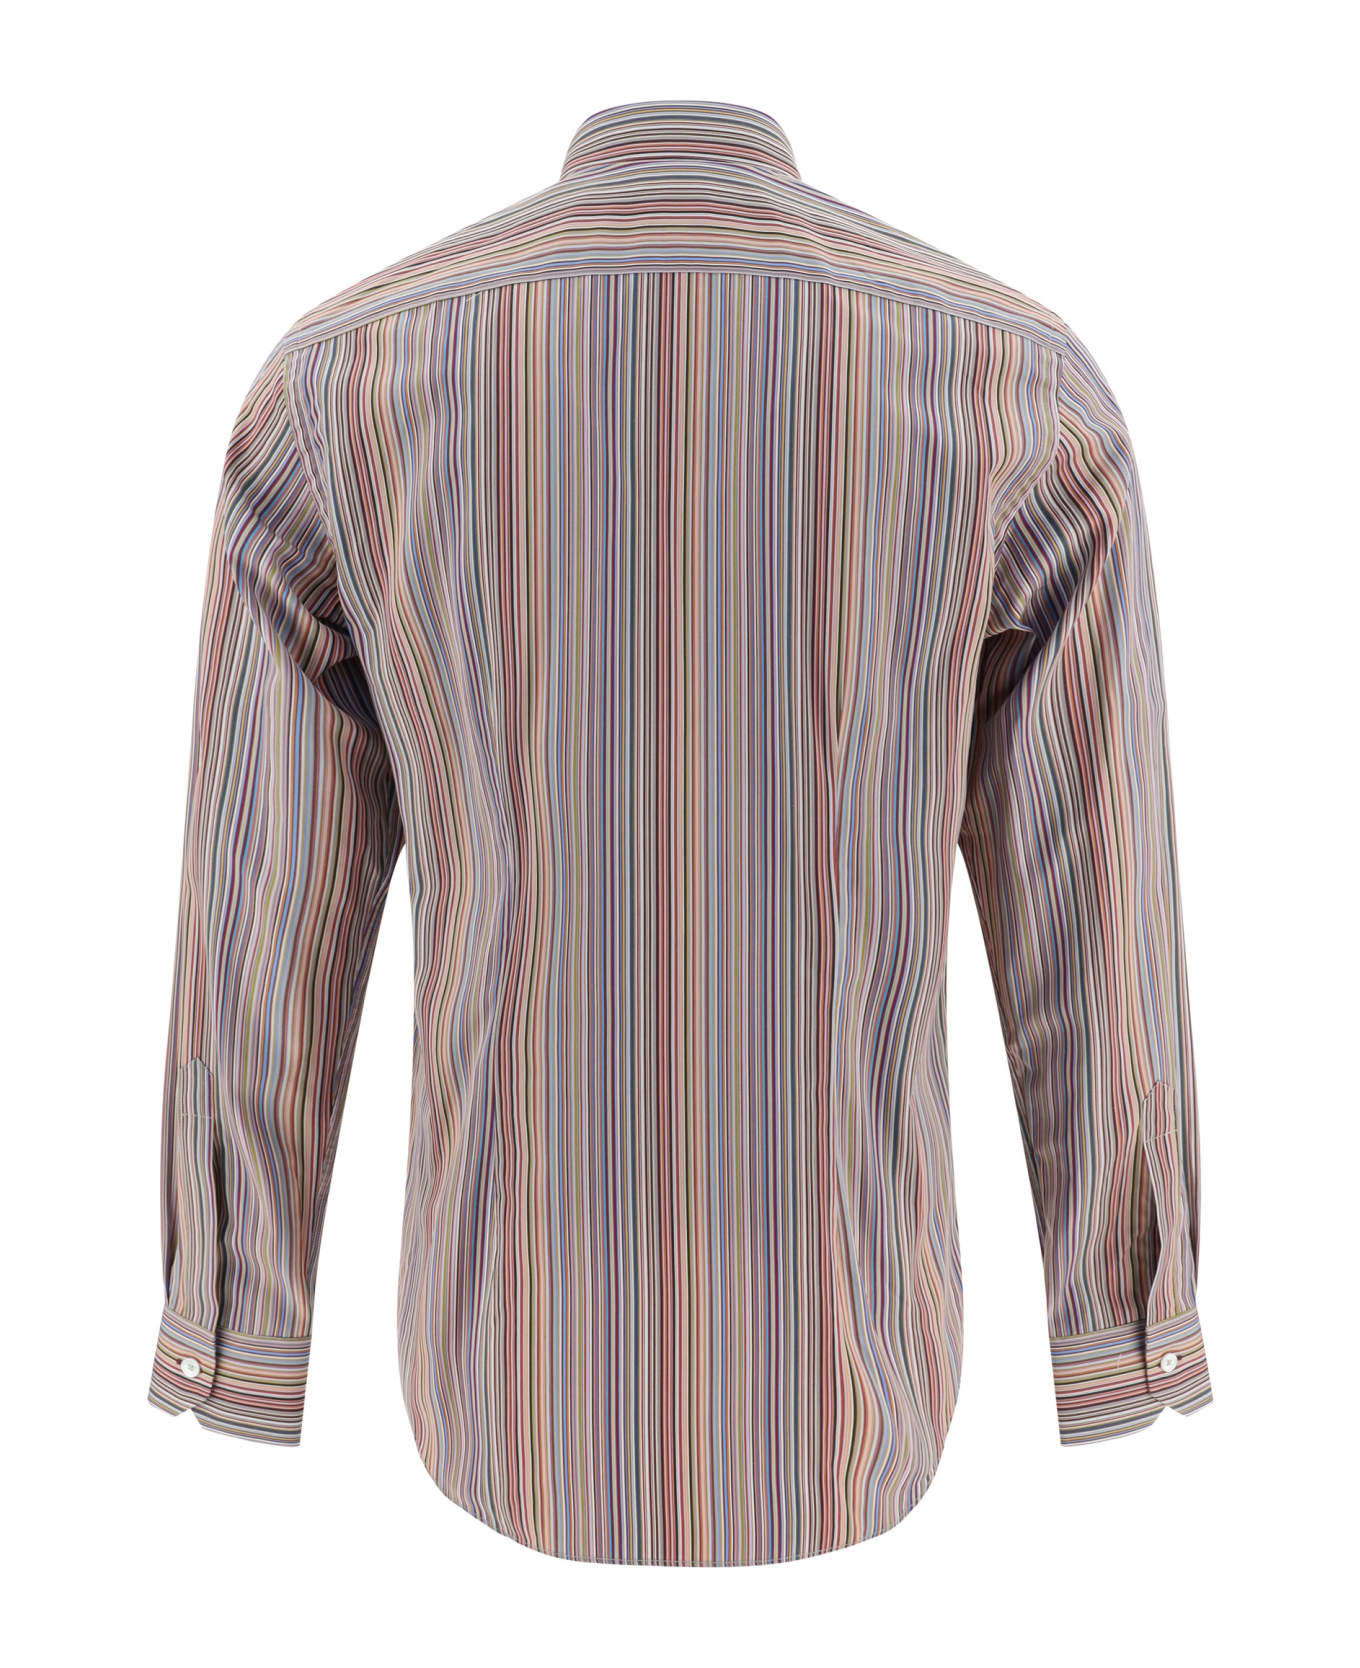 PS by Paul Smith Shirt Shirt - MULTI COLOURED